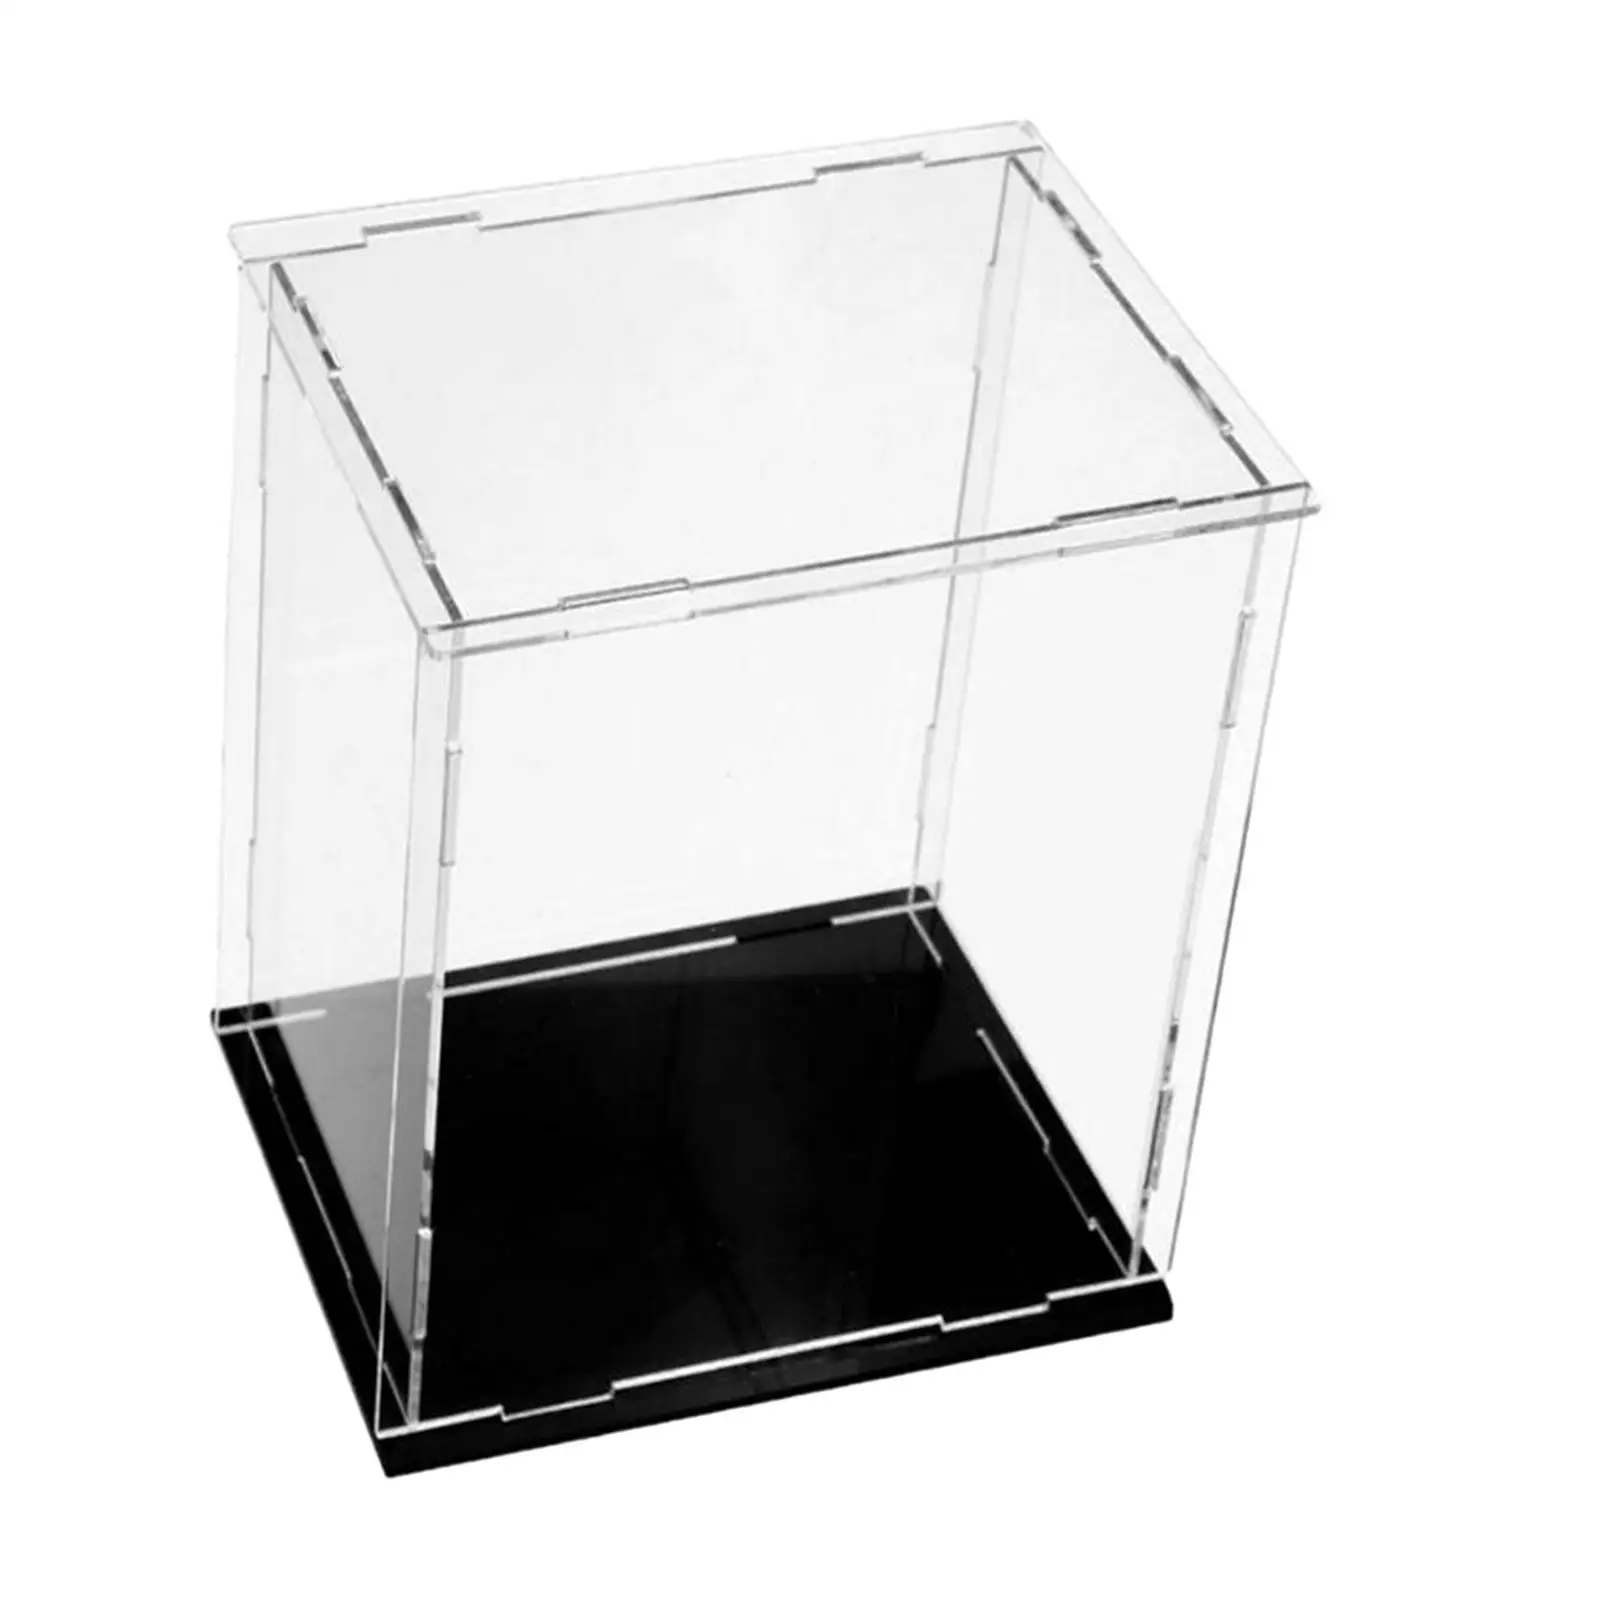 Acrylic Display Case Trophy Cup Showcase for Statue Cosmetics Action Figures